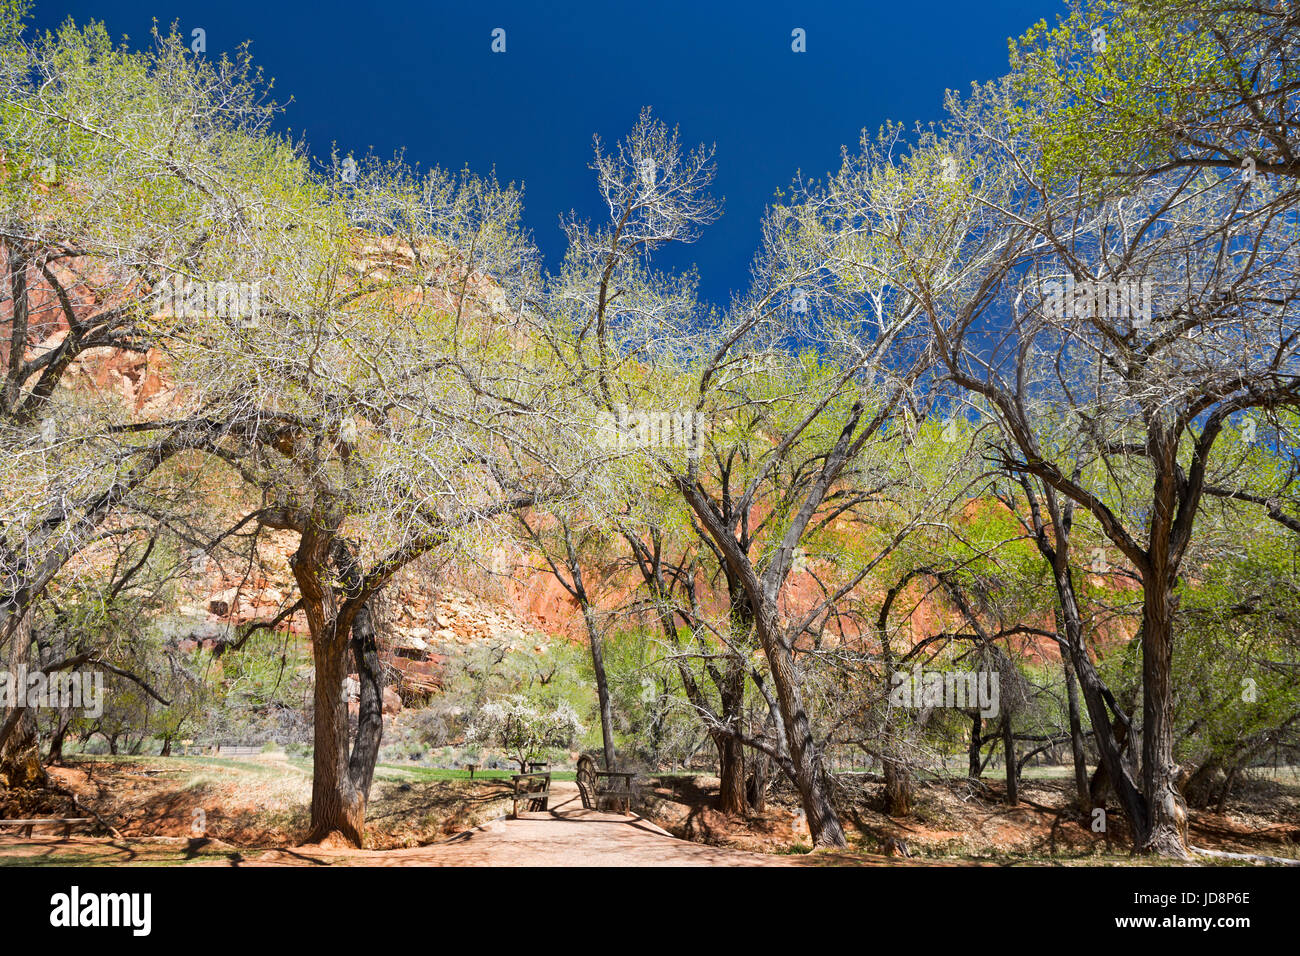 Cottonwood Trees by Fremont River Oasis in Historic Fruita District Capitol Reef National Park Utah United States Stock Photo